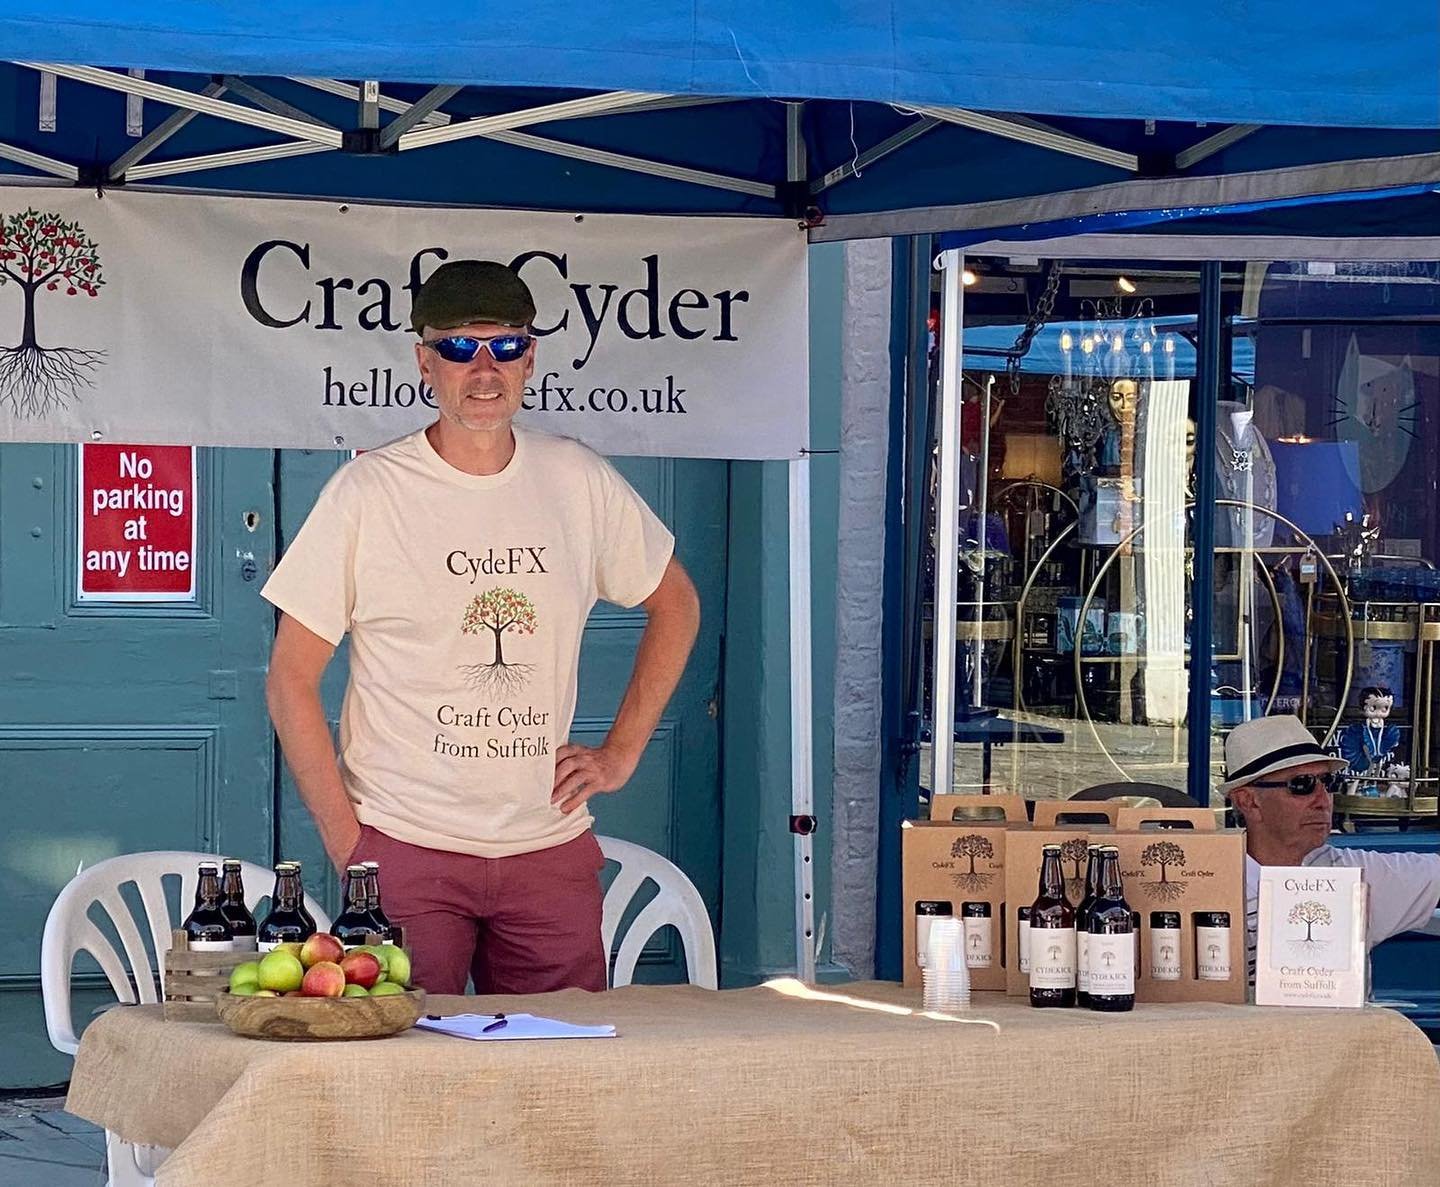 First street market at St Peter&rsquo;s St. today. Open from 10am to 4pm. Come on down for a free tasting.
.
.
.
.
#craftcider #realcider #cider #suffolkcider